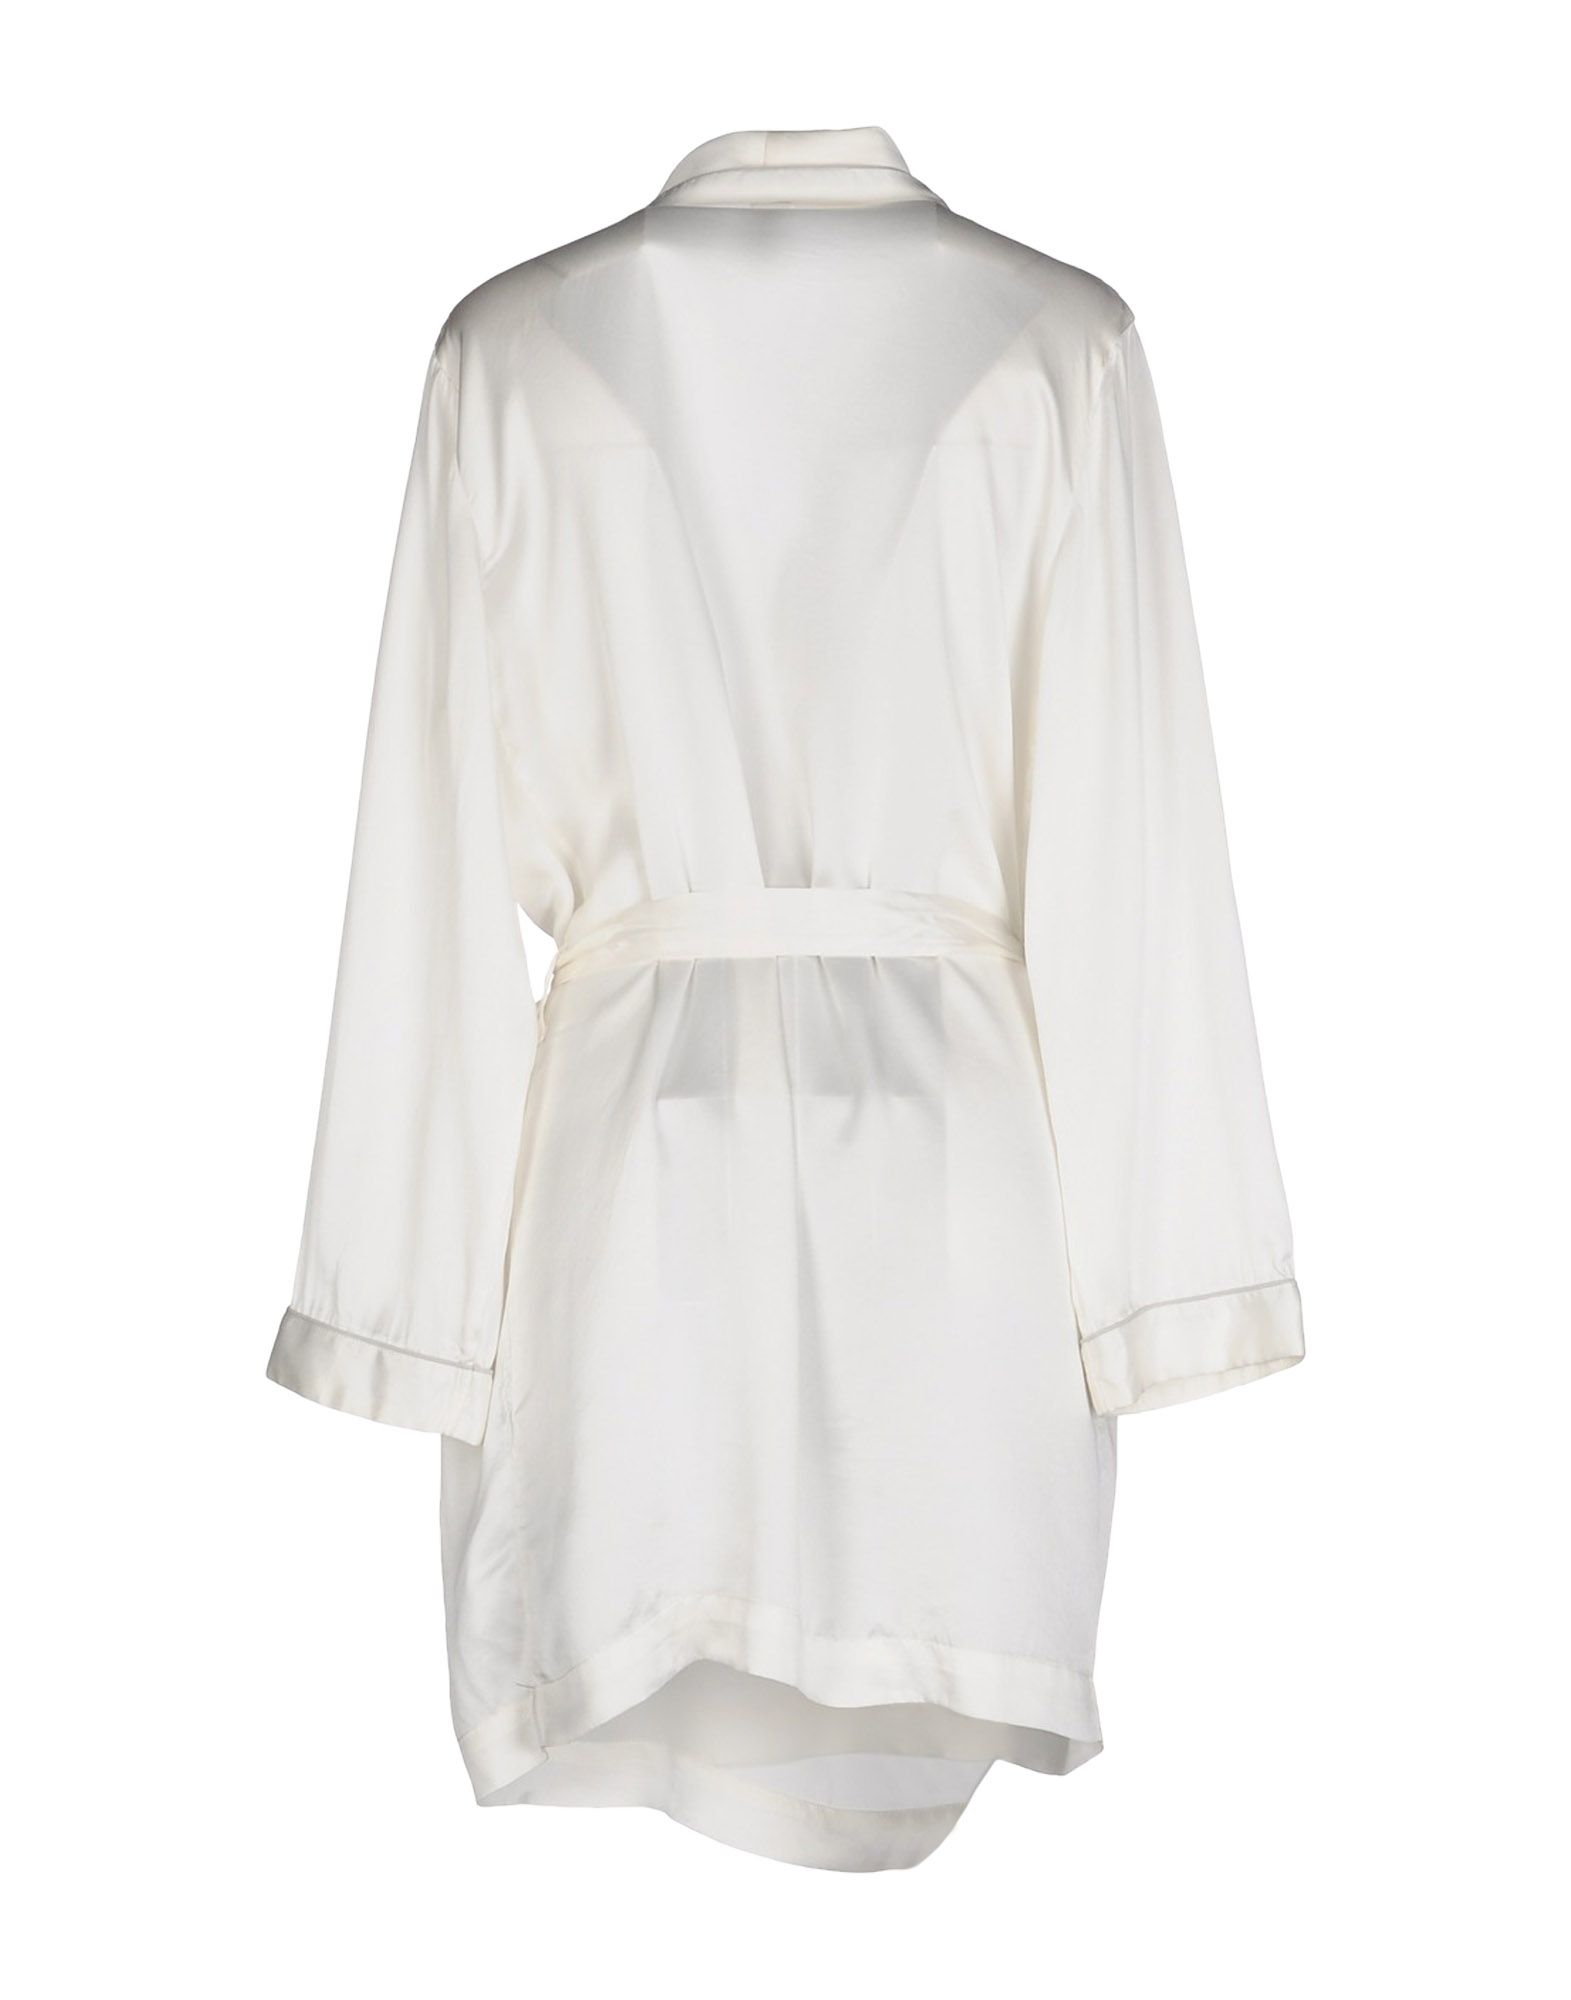 Bodas Dressing Gown in White (Ivory) | Lyst